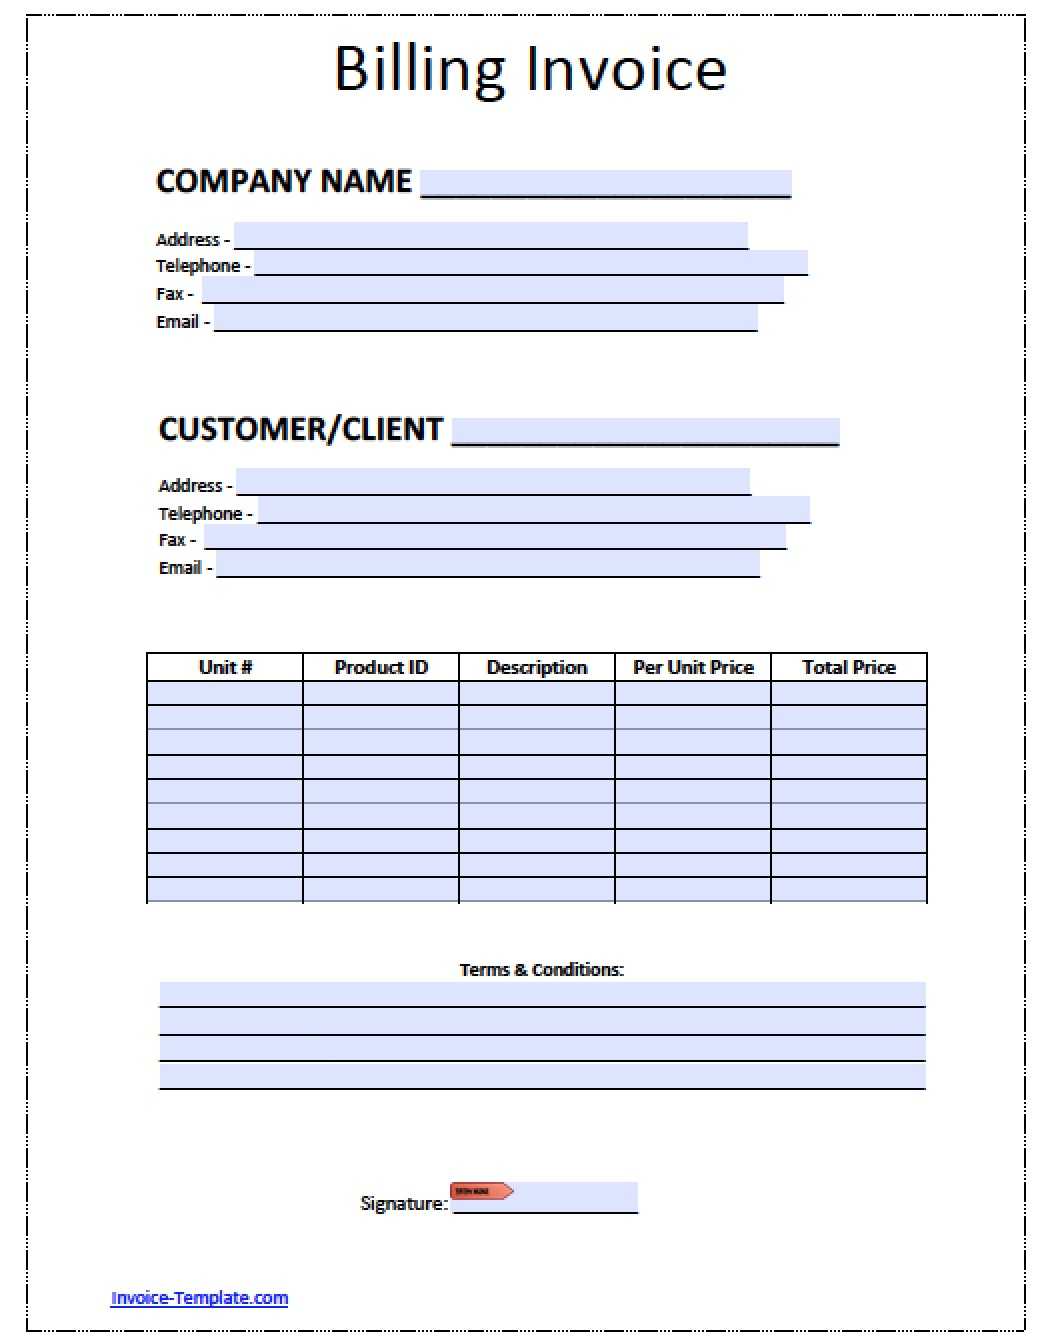 Word Billing Invoice Template – Zohre.horizonconsulting.co For Invoice Template Word 2010